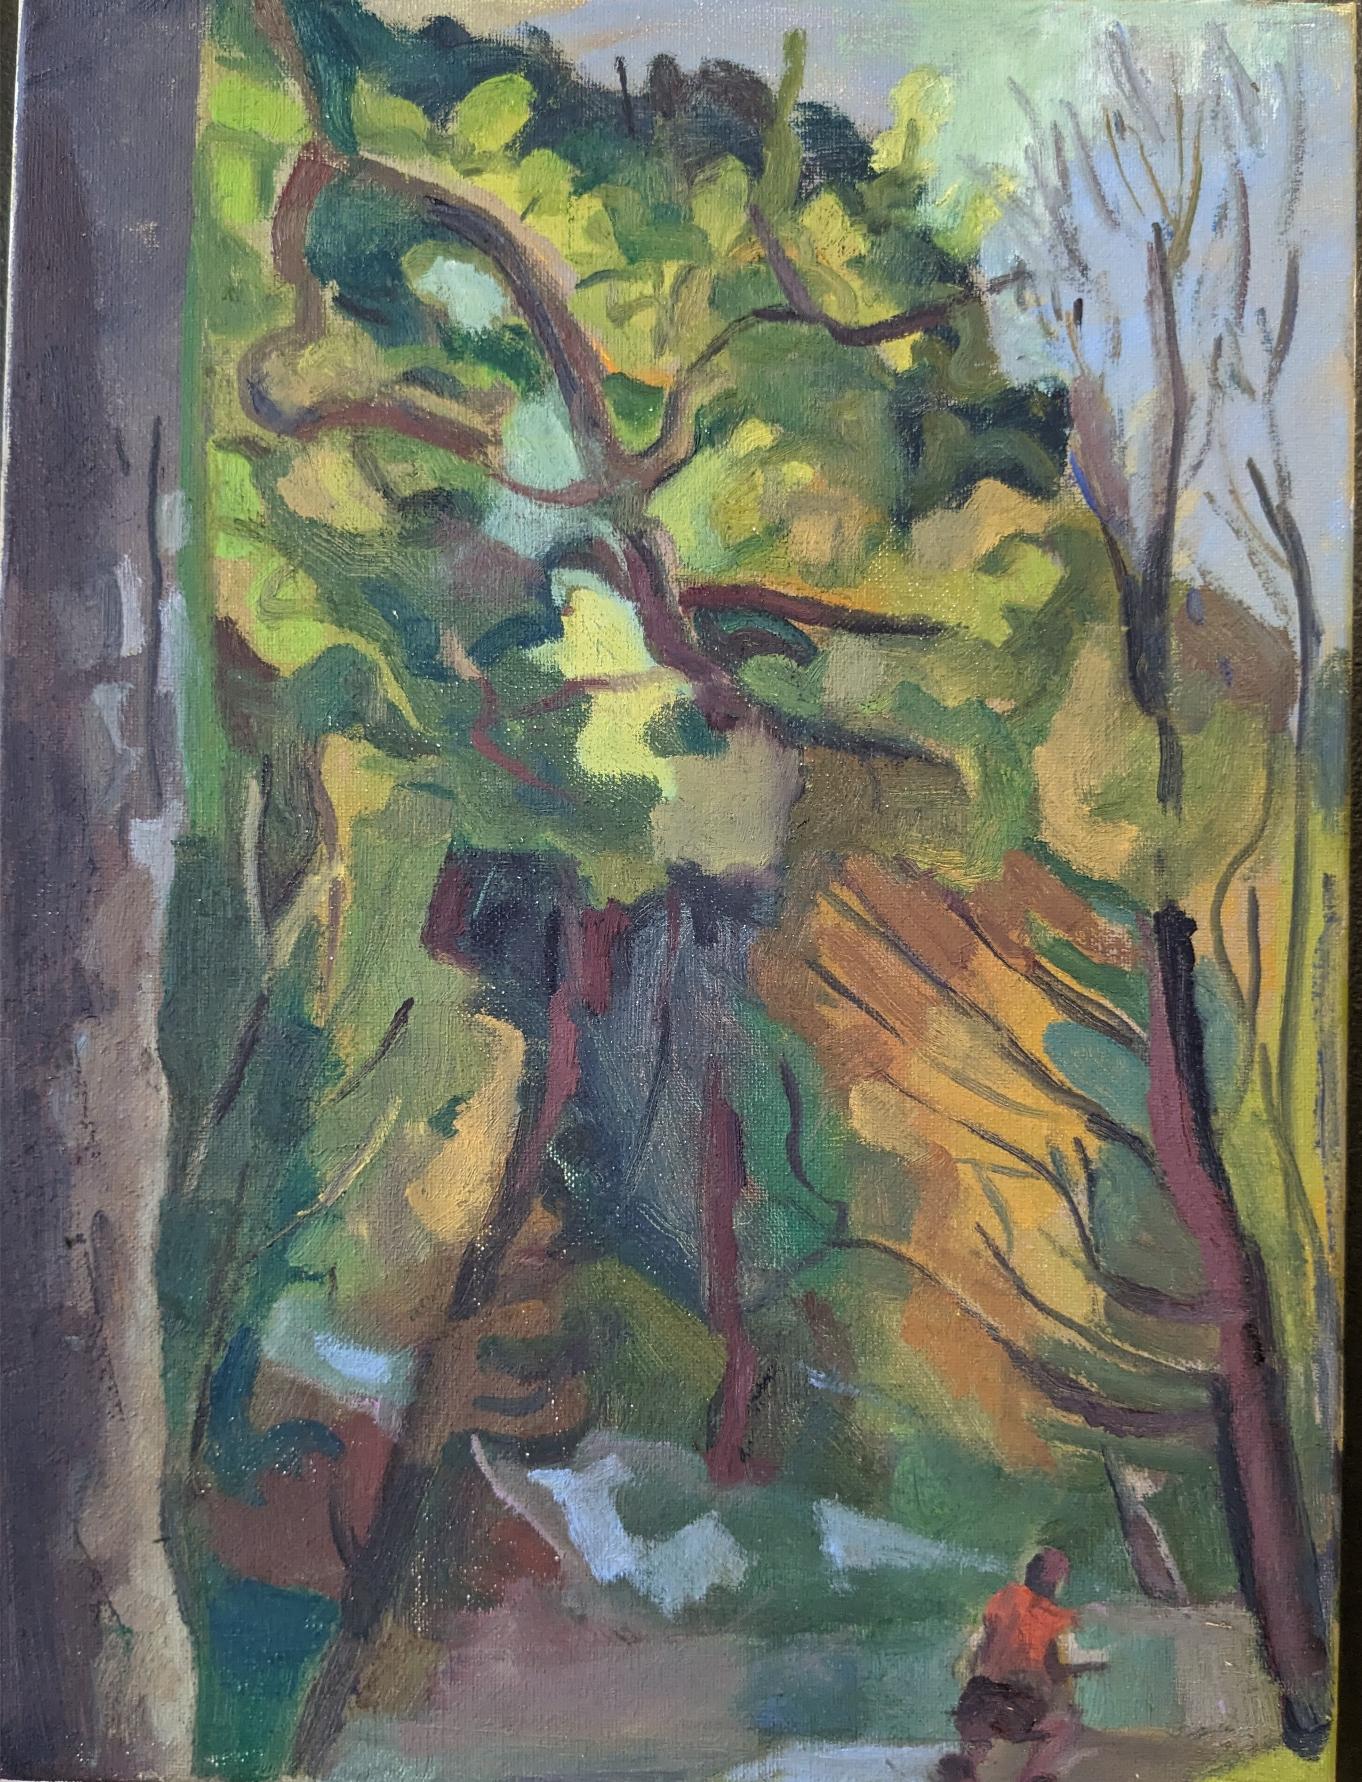 A plein air painting of trees and a person